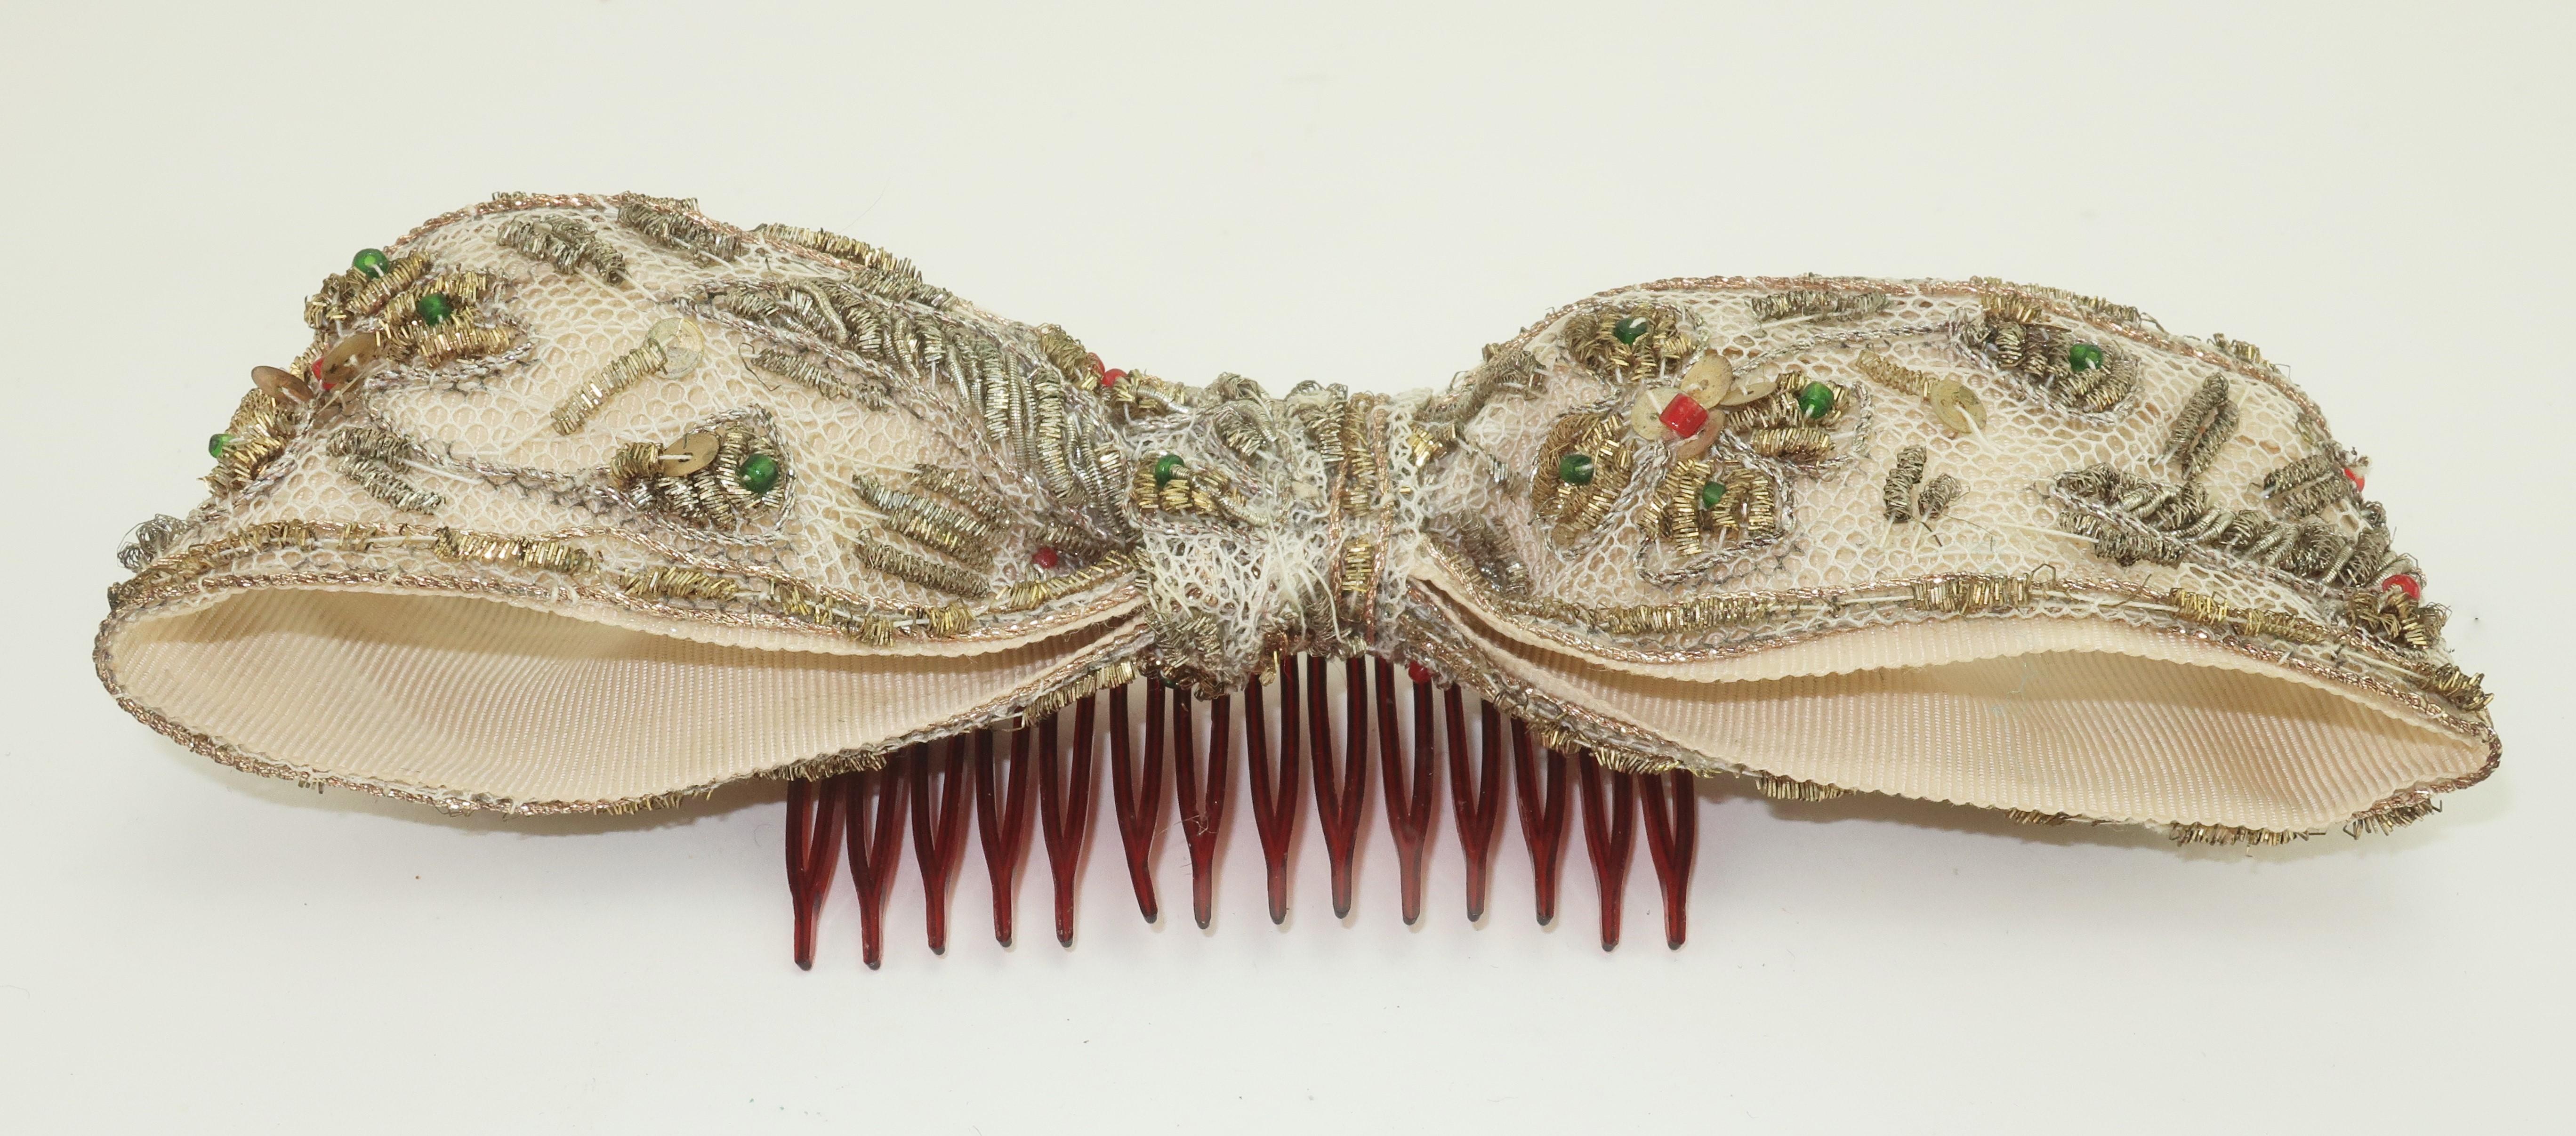 1950's Therese Ahrens bow hair ornament in an antique white grosgrain with netting and metallic threads embellished by beading.  The red and green beads add a dash of color to the antiqued gold beading which provides the bow an exotic old world